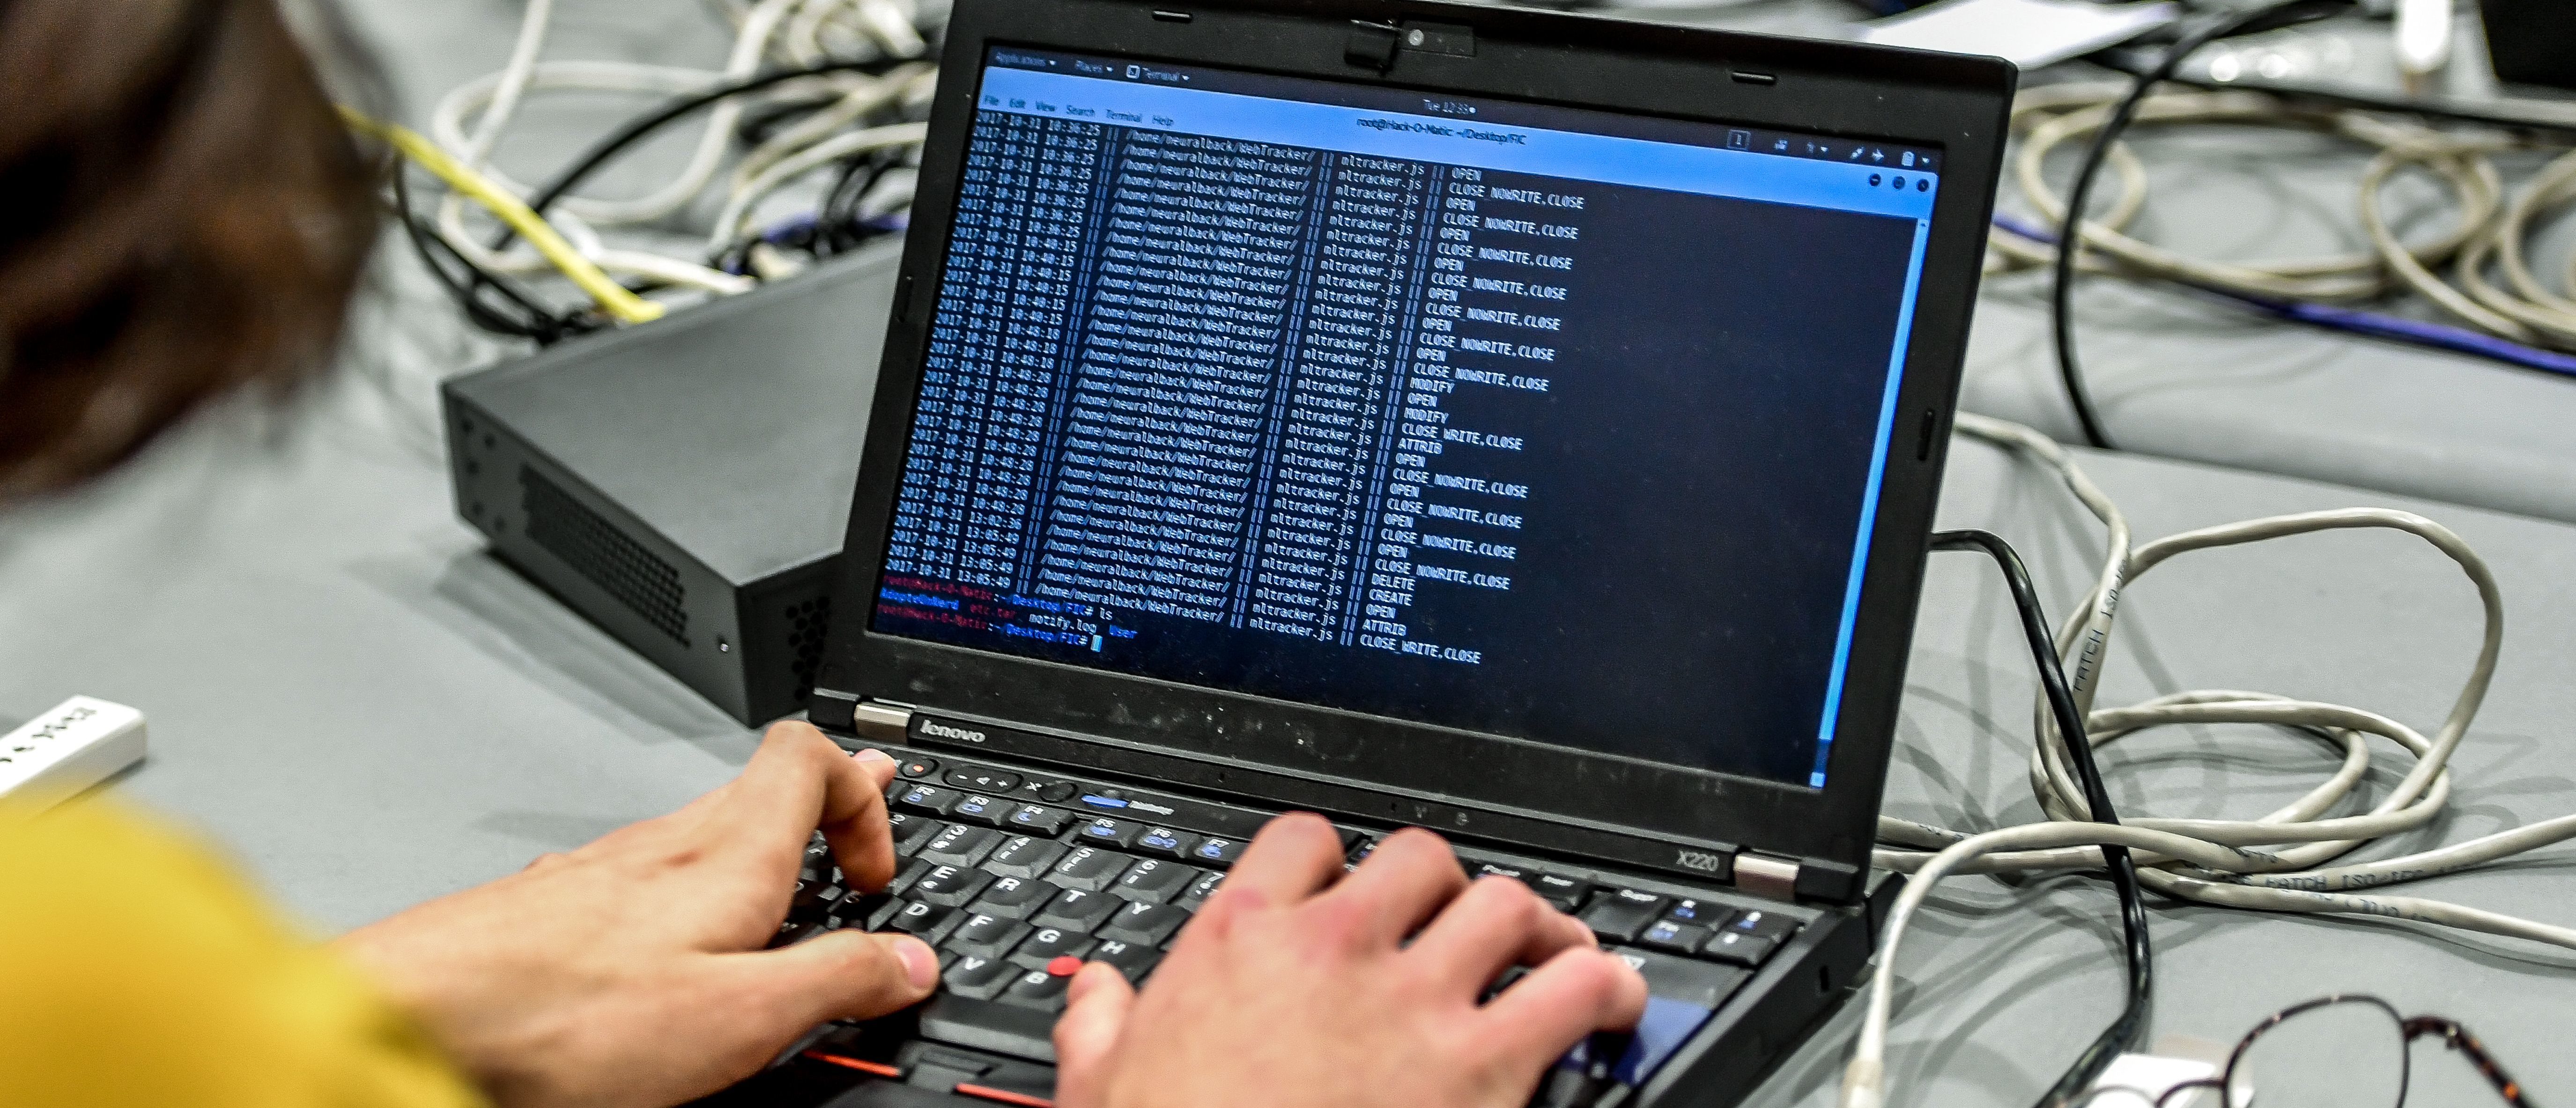 A person works at a computer during the 10th International Cybersecurity Forum in Lille on January 23, 2018. / AFP PHOTO / Philippe Huguen (PHILIPPE HUGUEN/AFP/Getty Images)